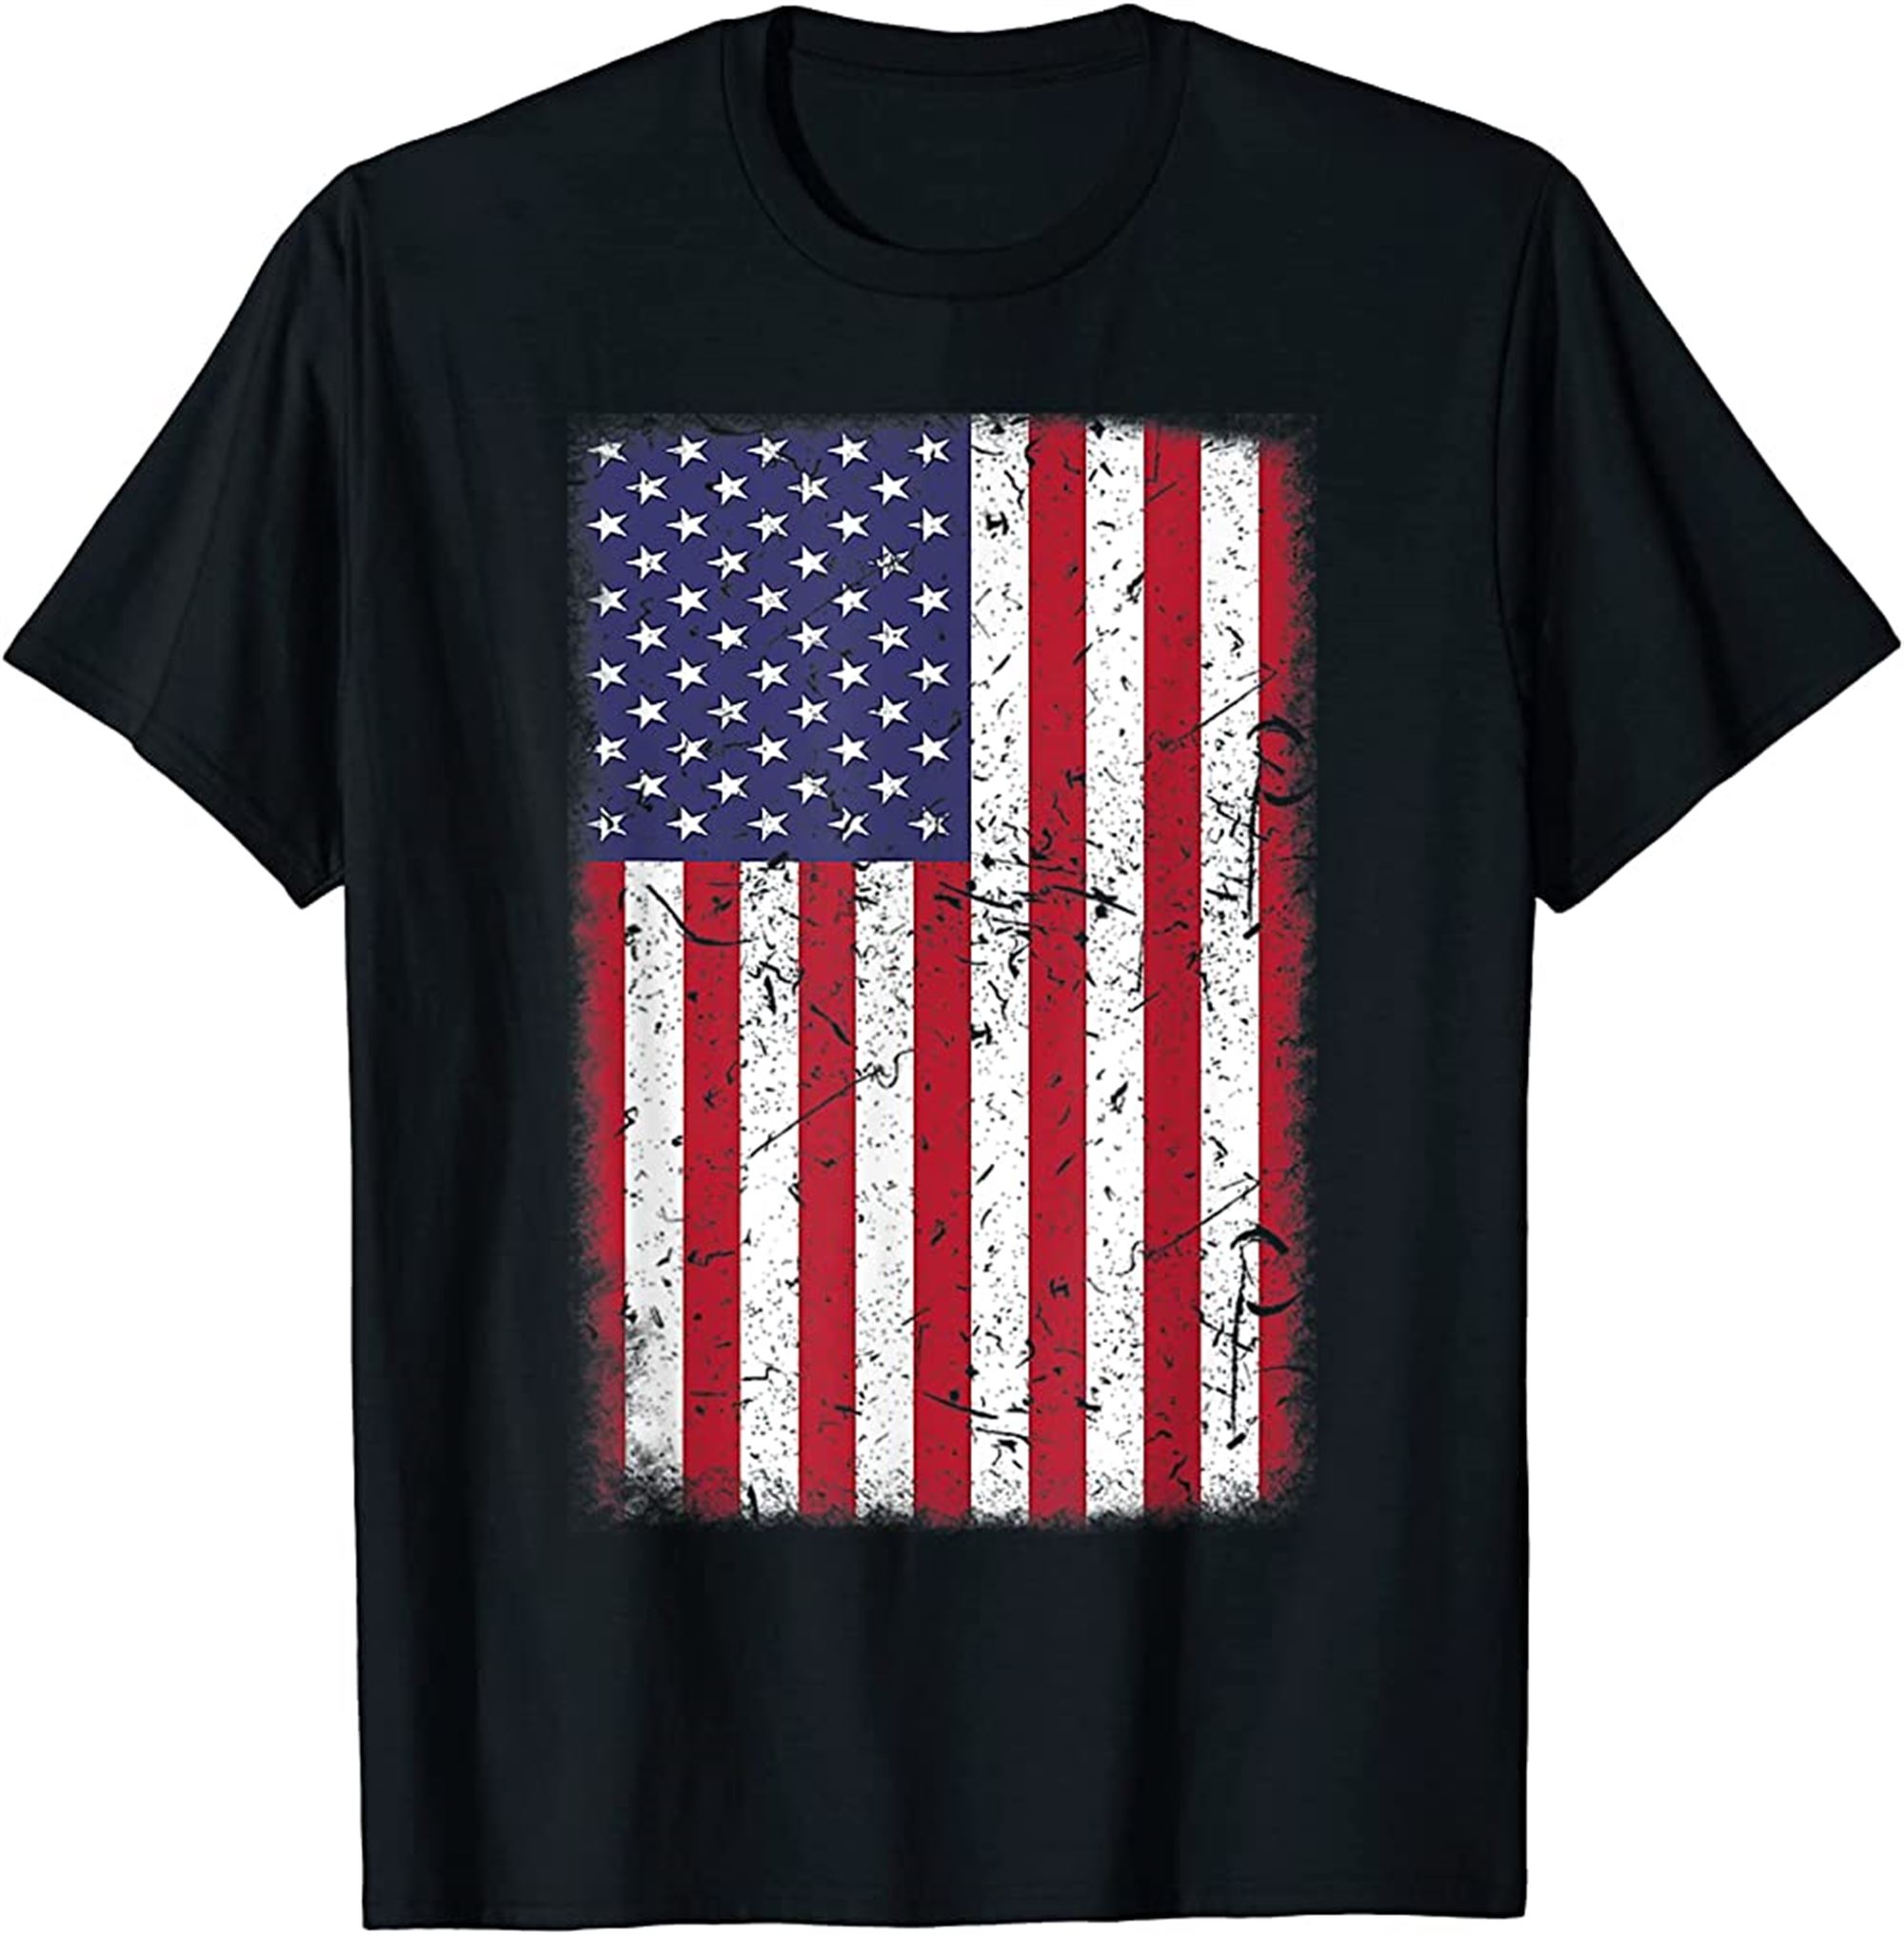 Usa American Flag 4th Of July Red White Blue Star Stripes T-shirt Full Size Up To 5xl